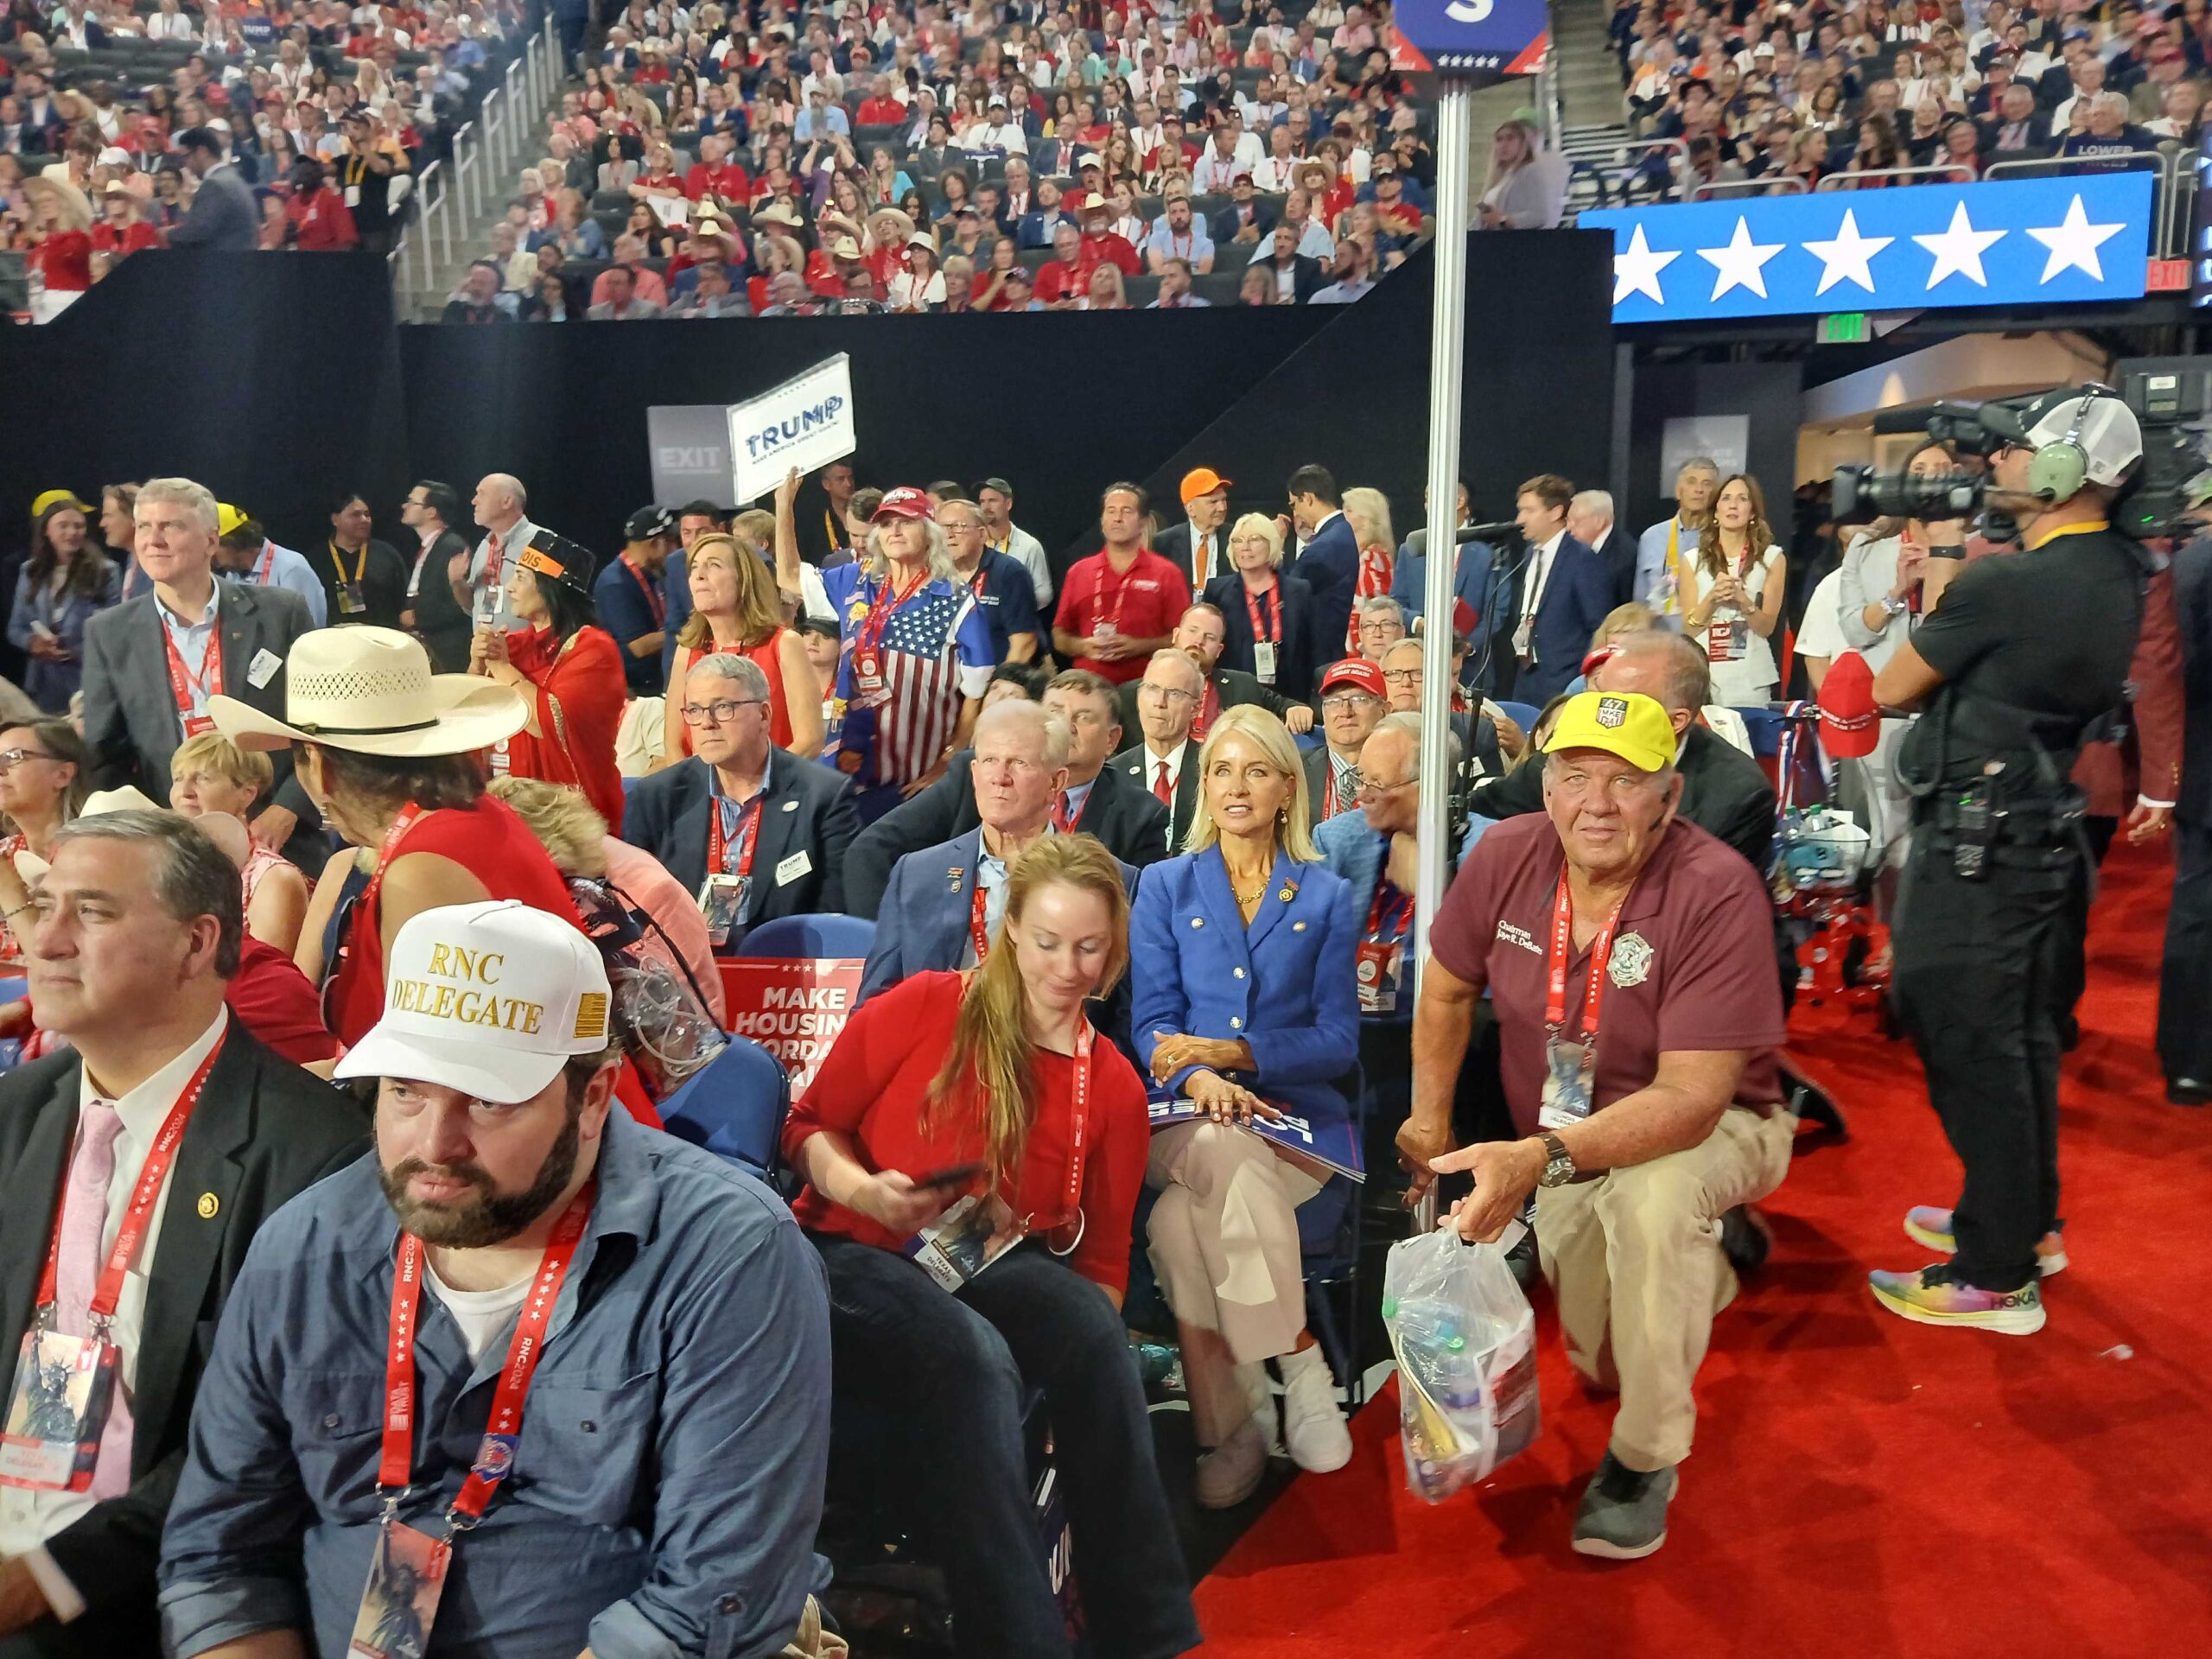 crowd at political convention